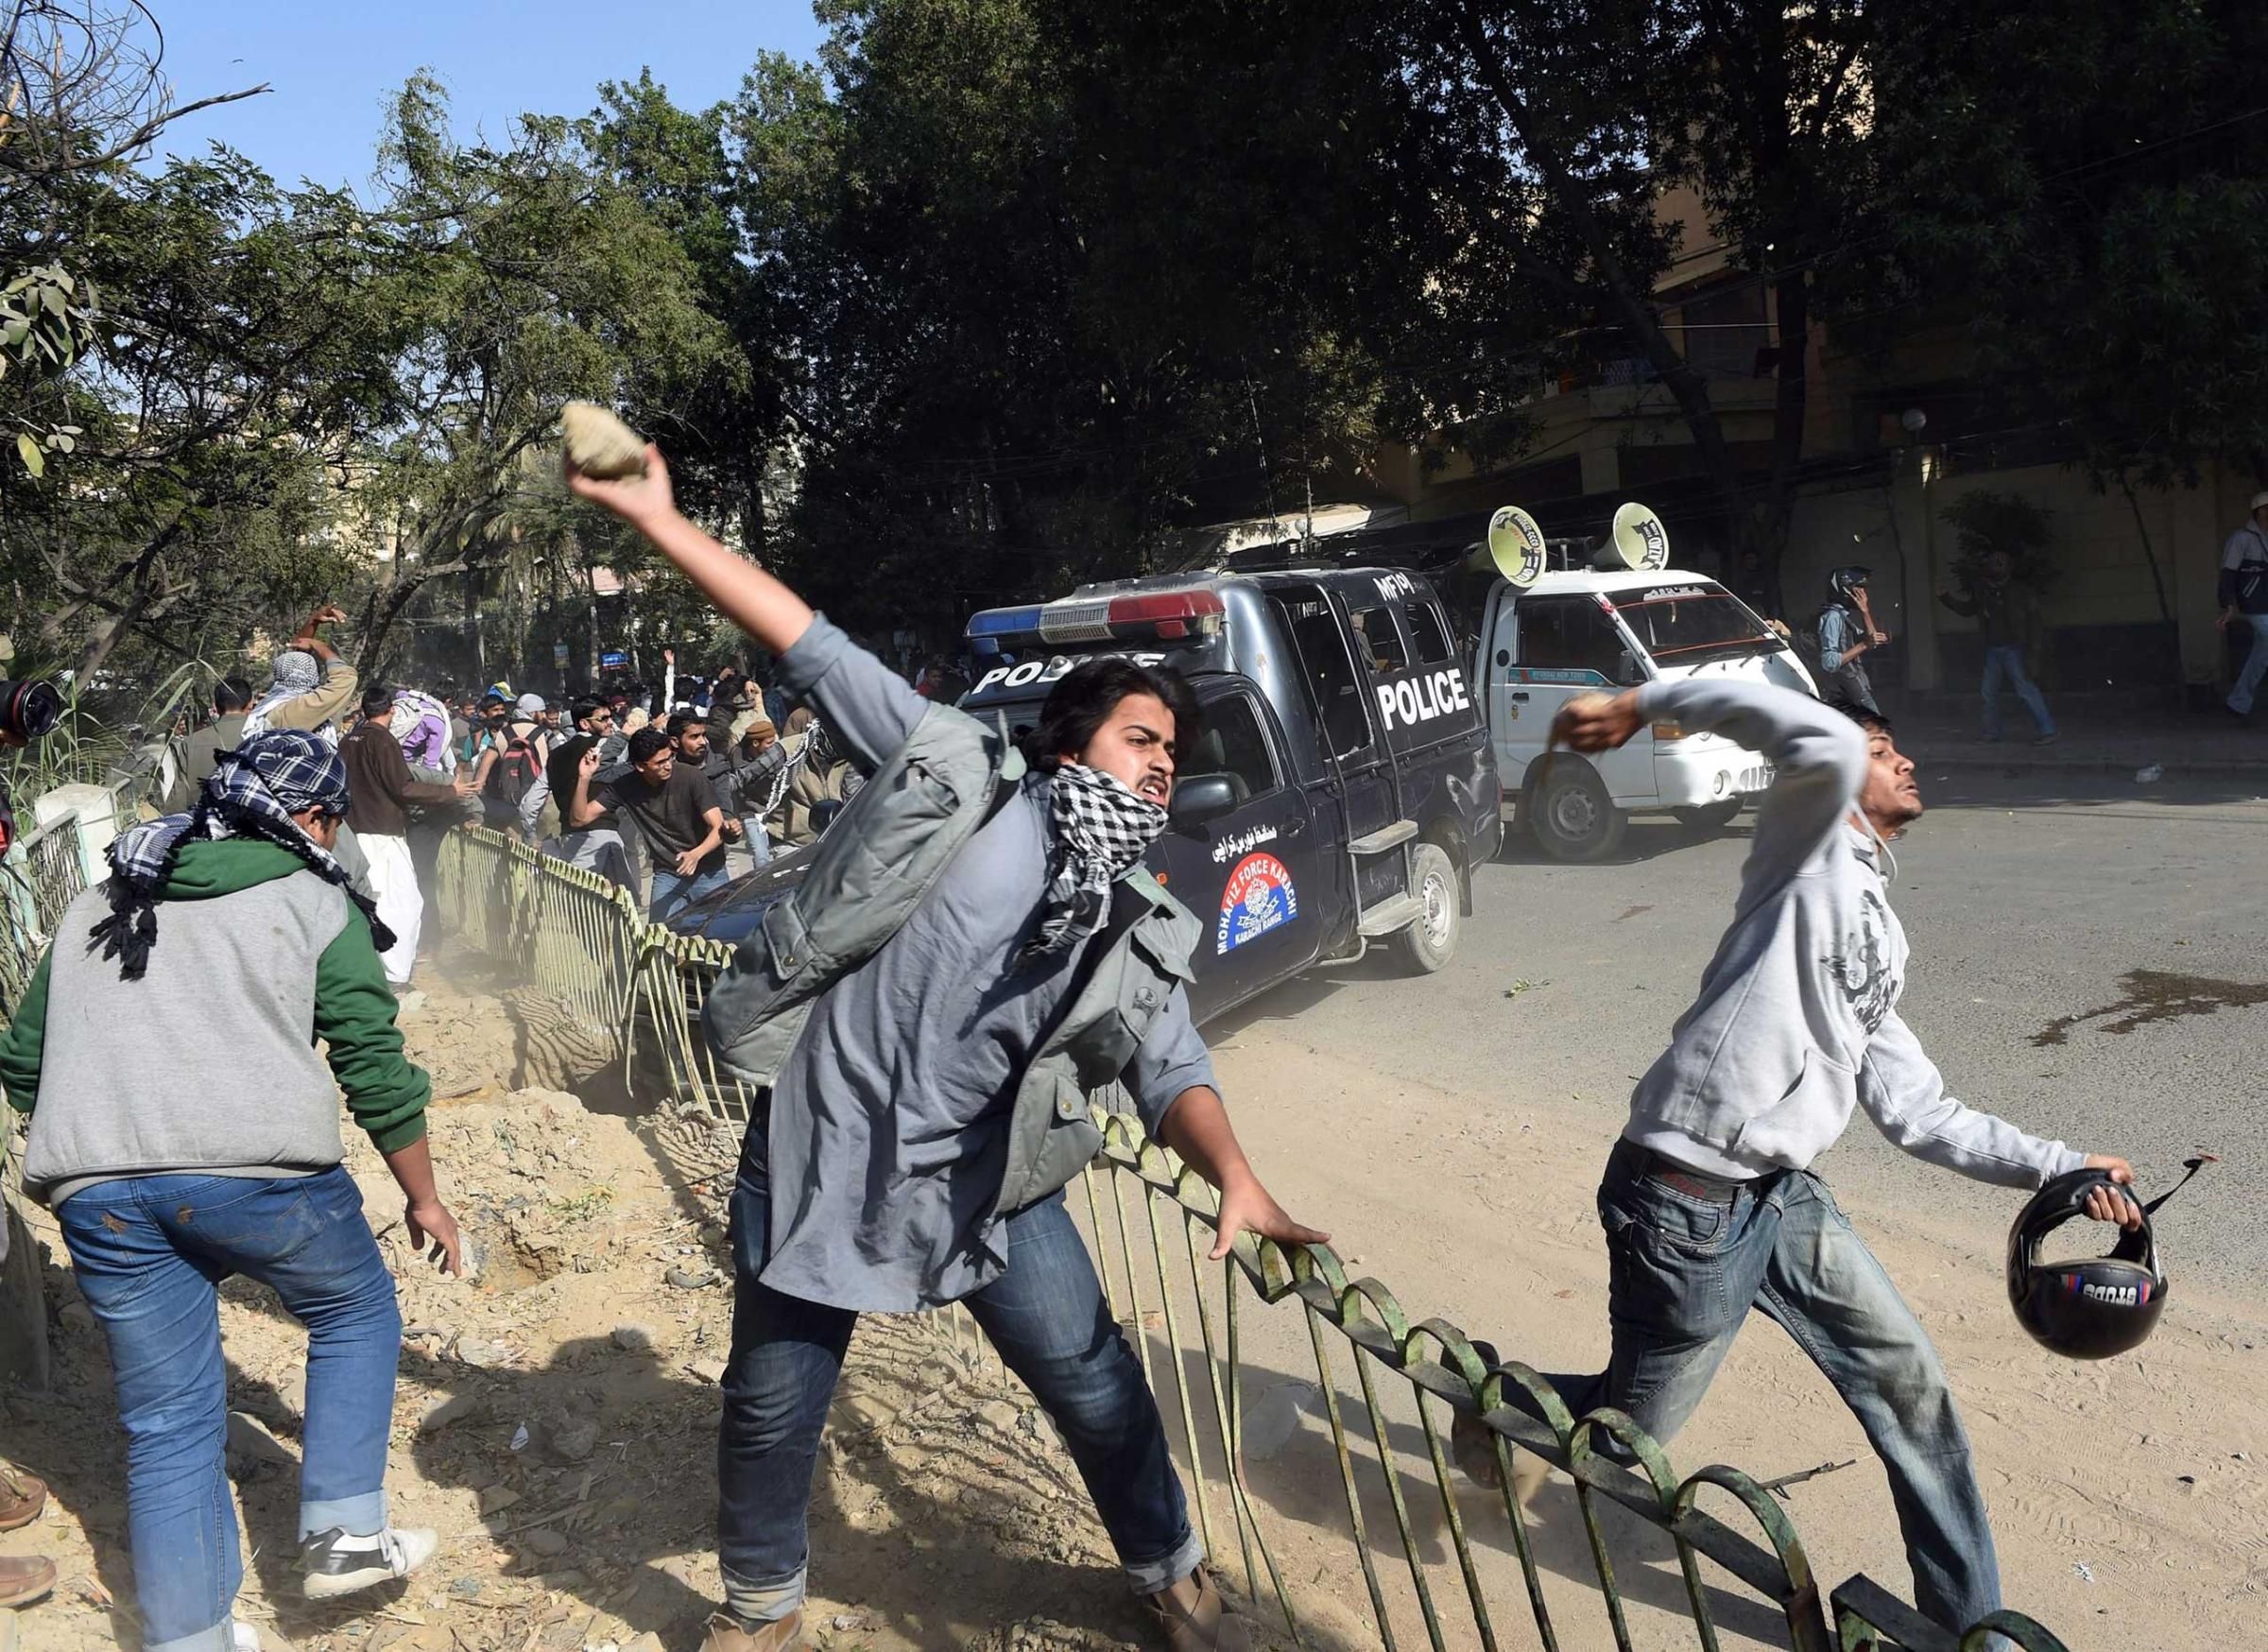 Pakistani activists of the Jamaat-e-Islami religious party throw stones toward riot police during a protest against the printing of satirical sketches of the Prophet Muhammad by French magazine Charlie Hebdo in Karachi, Pakistan on Jan.16, 2014.